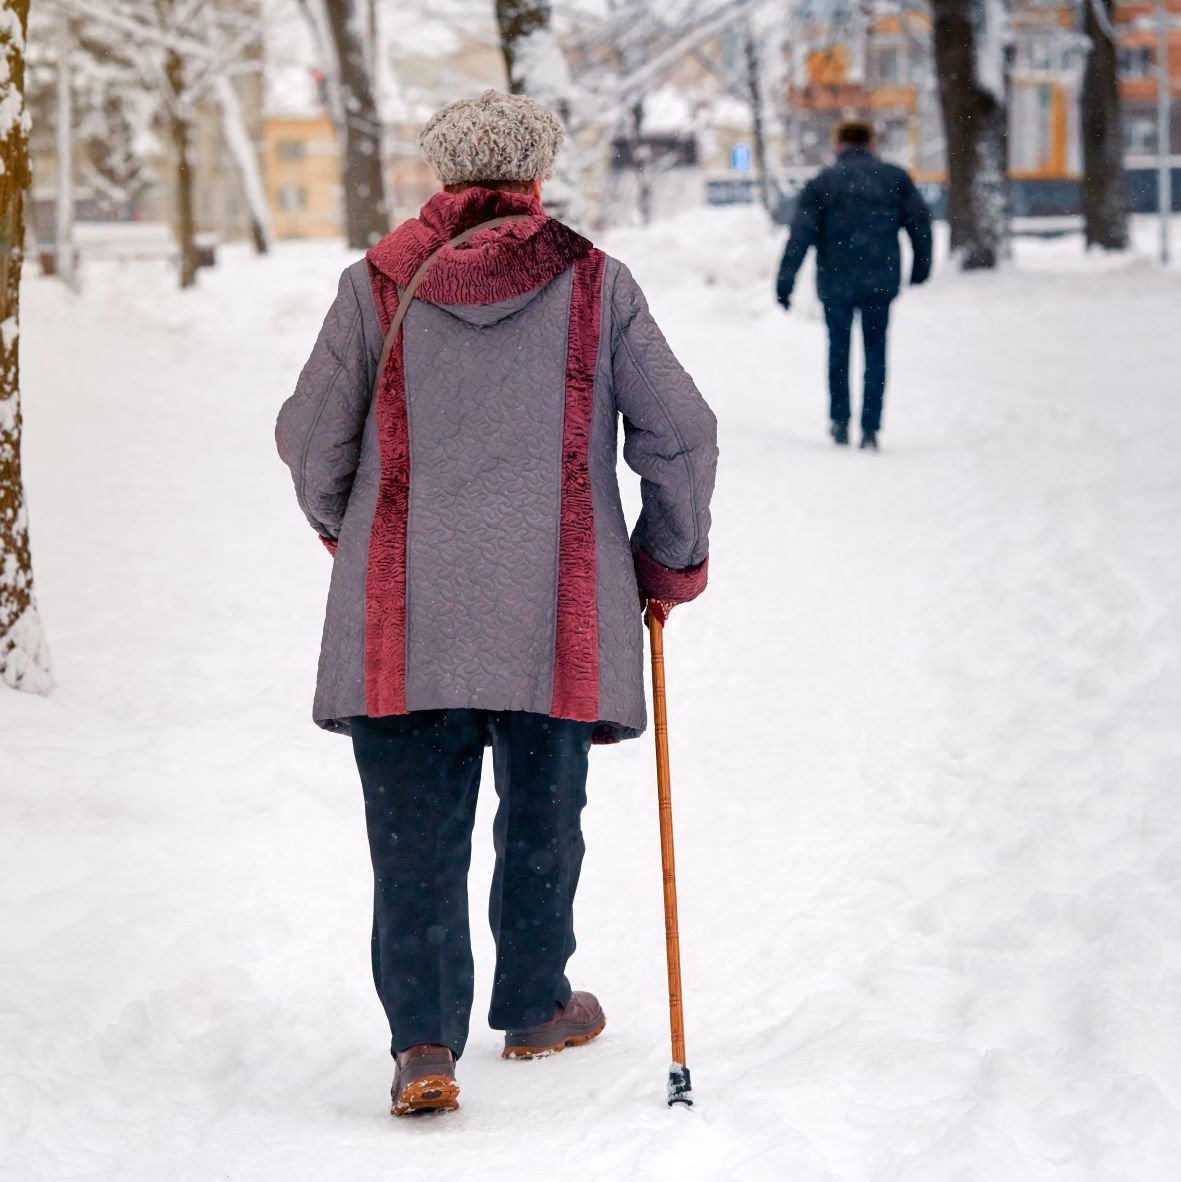 3 Ways Medical Alert Devices Help Seniors In The Winter